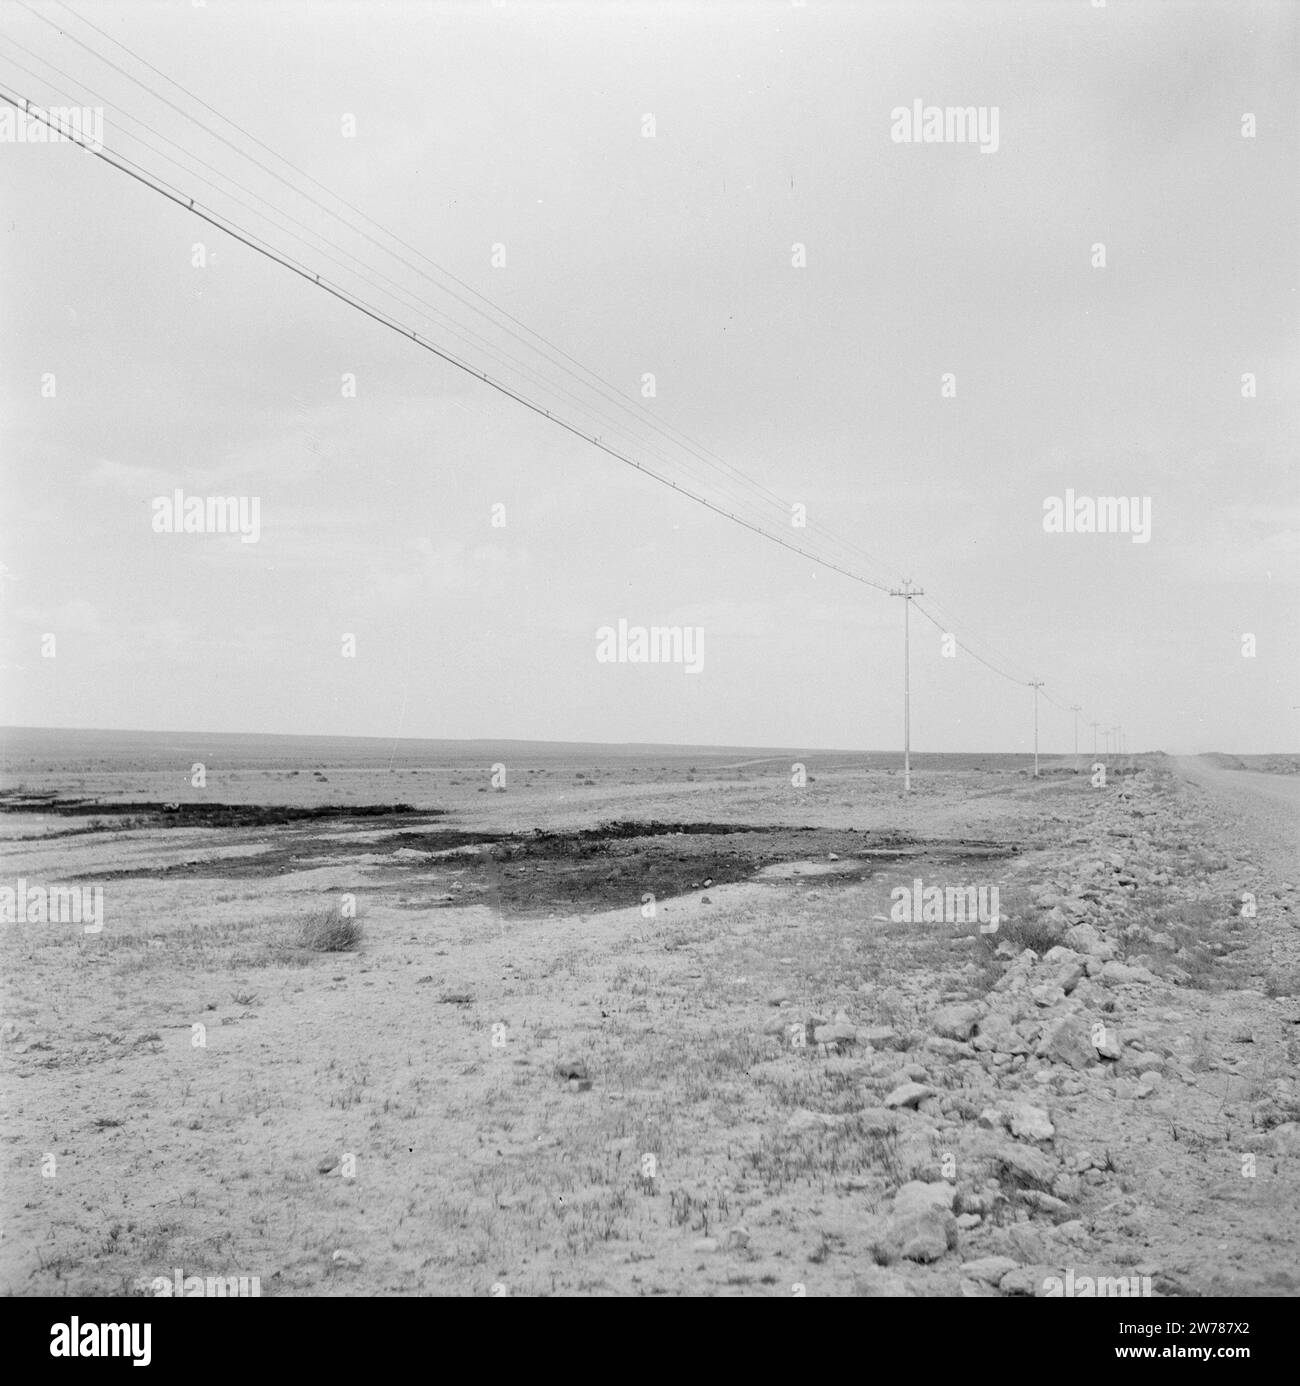 Oil slick caused by leakage from pipeline ca. 1950-1955 Stock Photo